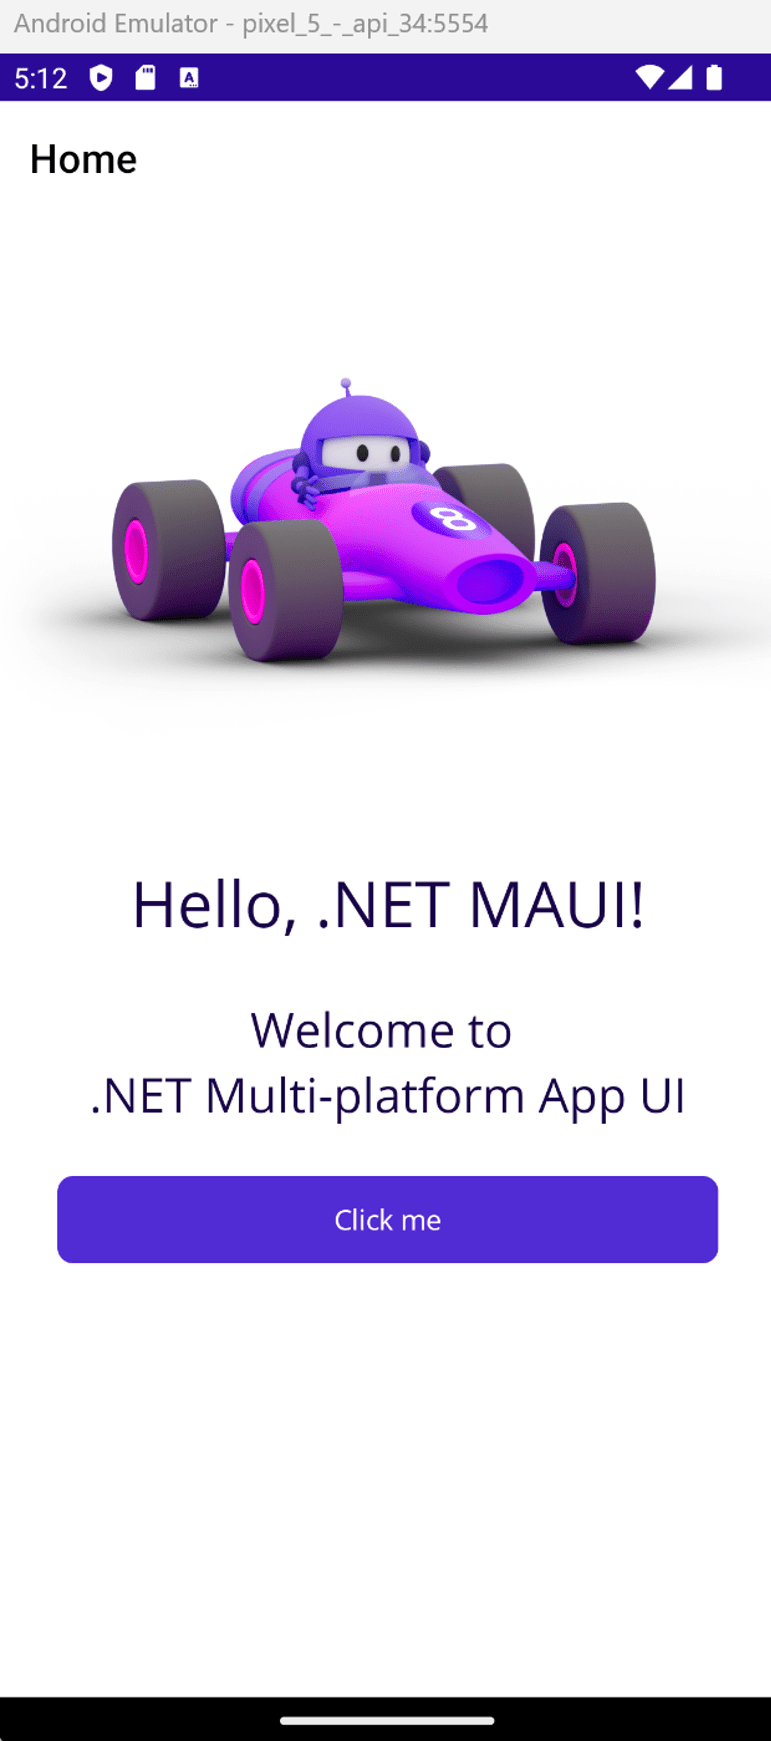 Android emulator running the .NET MAUI app. A 'Hello, World!' message is displayed.